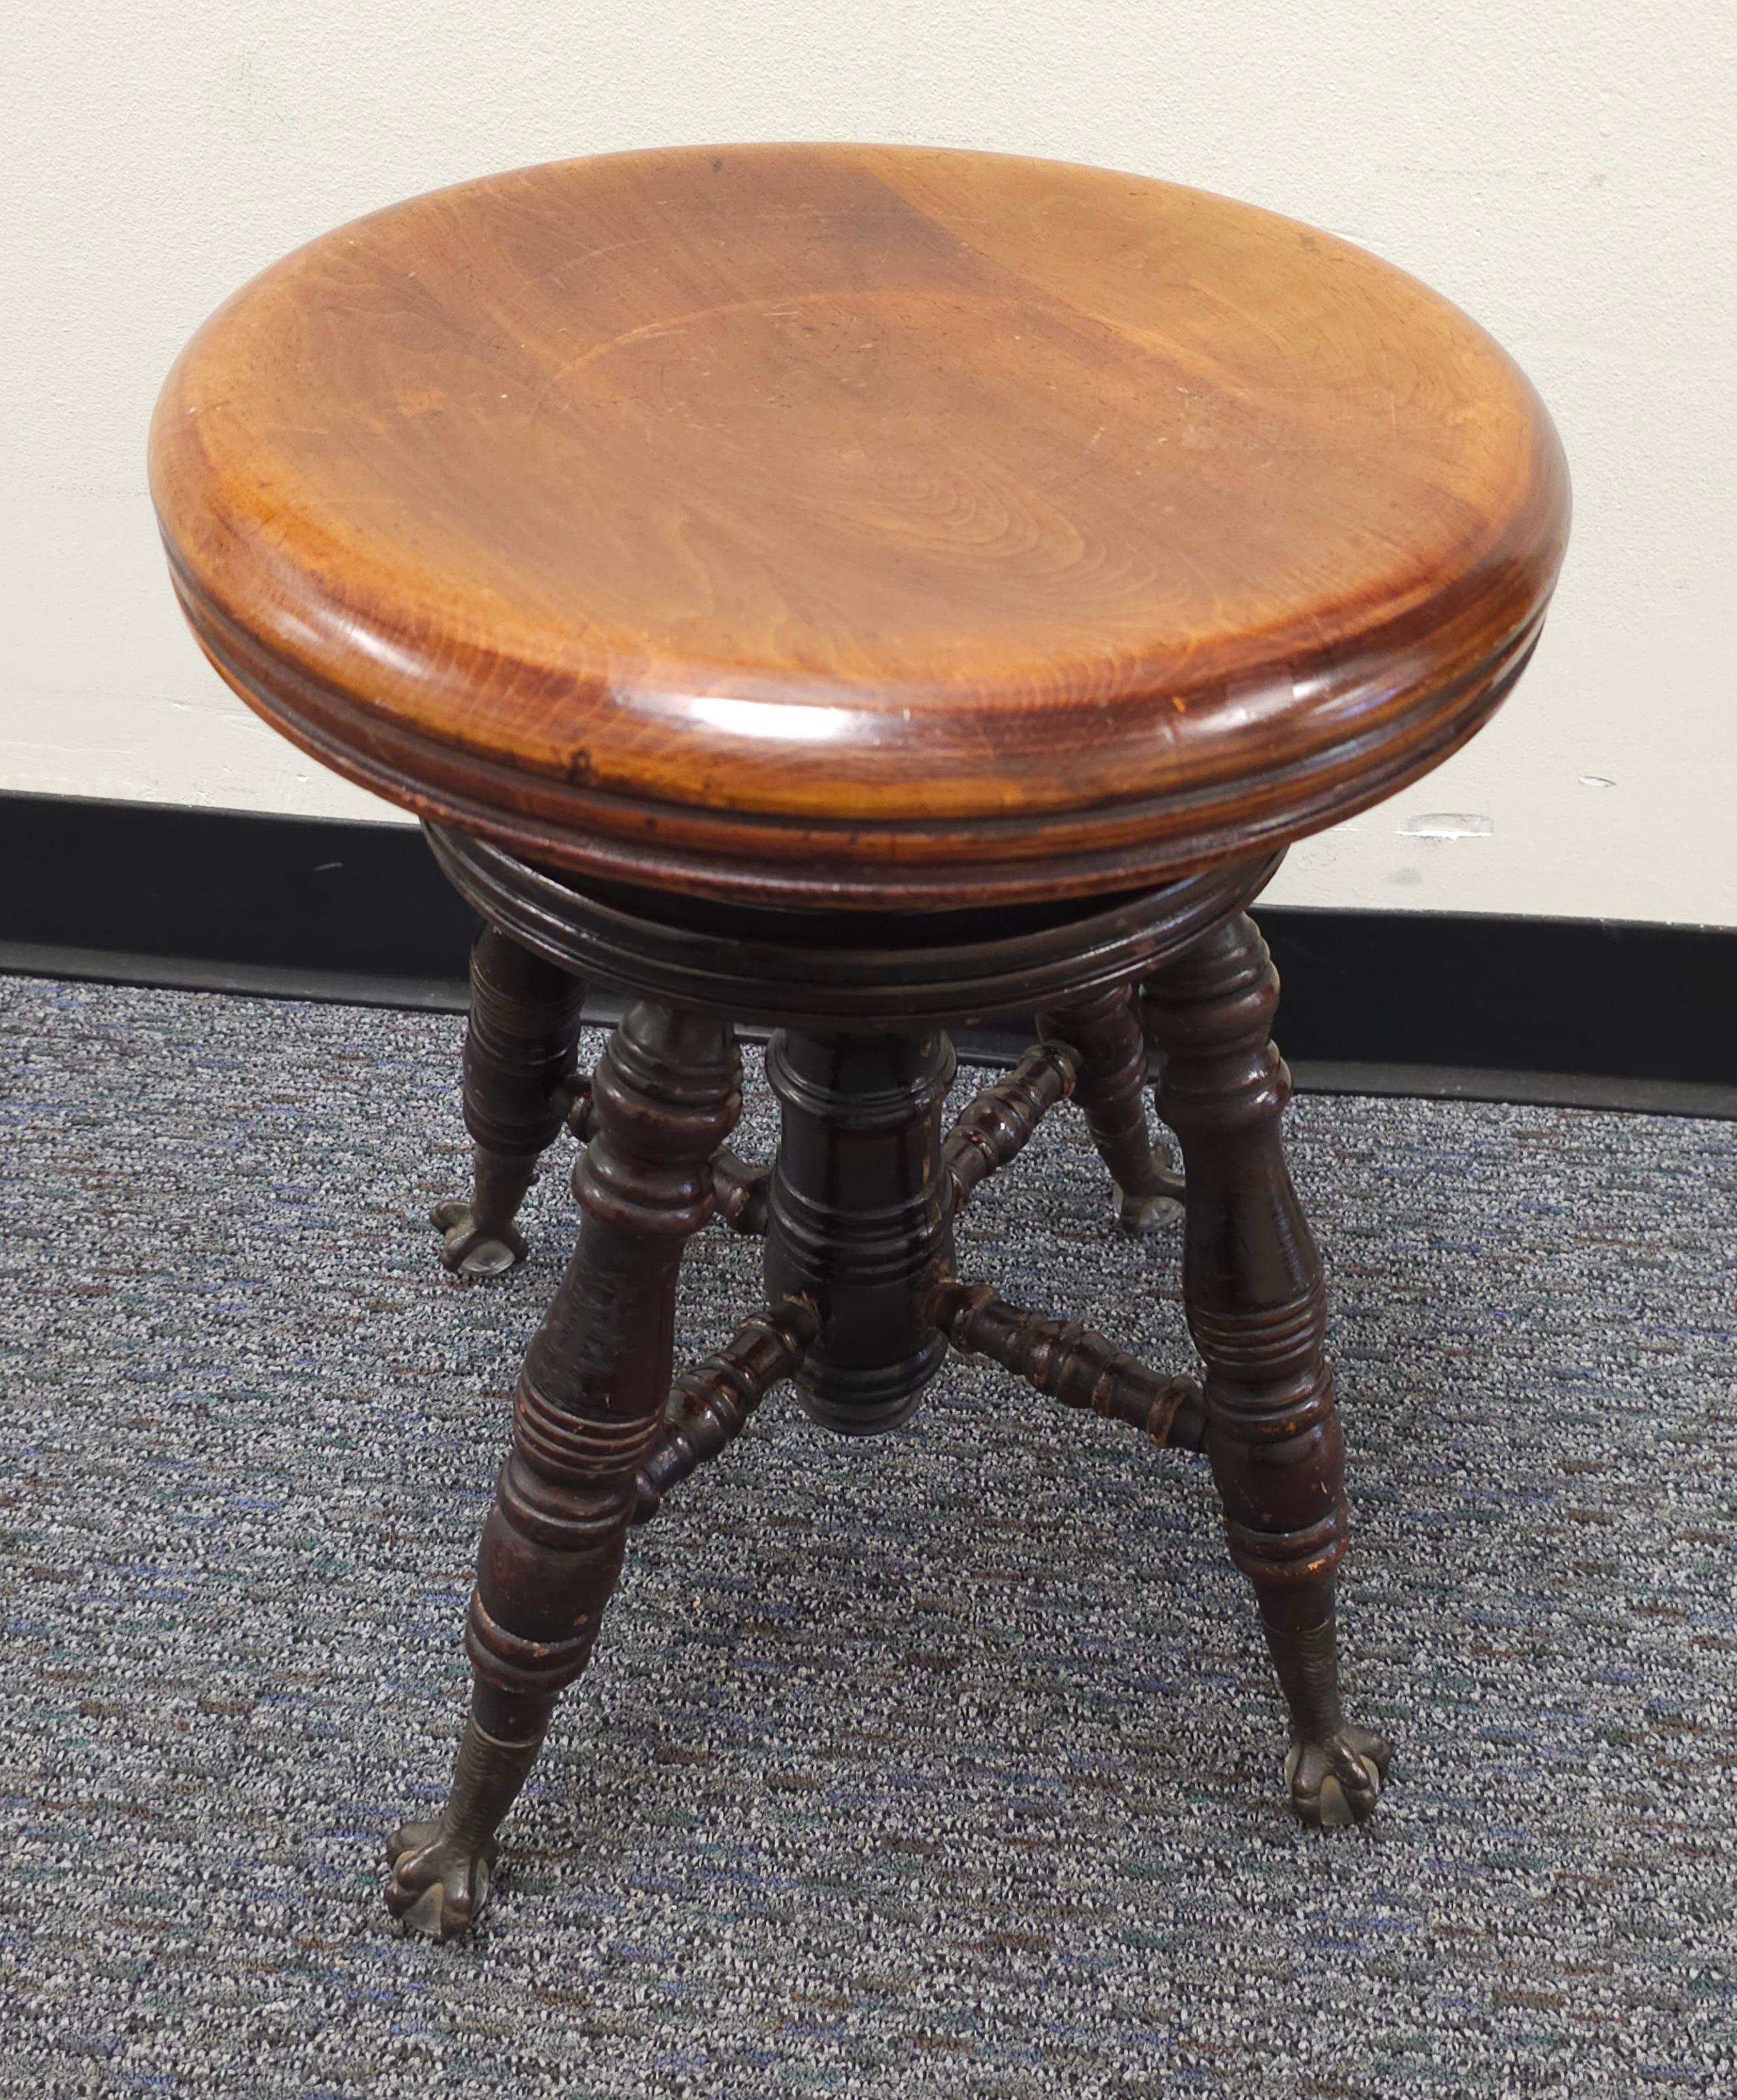 Mid-19th C. Charles Parker Mahogany and Iron Piano Stool with Ball Claw Feet In Good Condition For Sale In Germantown, MD